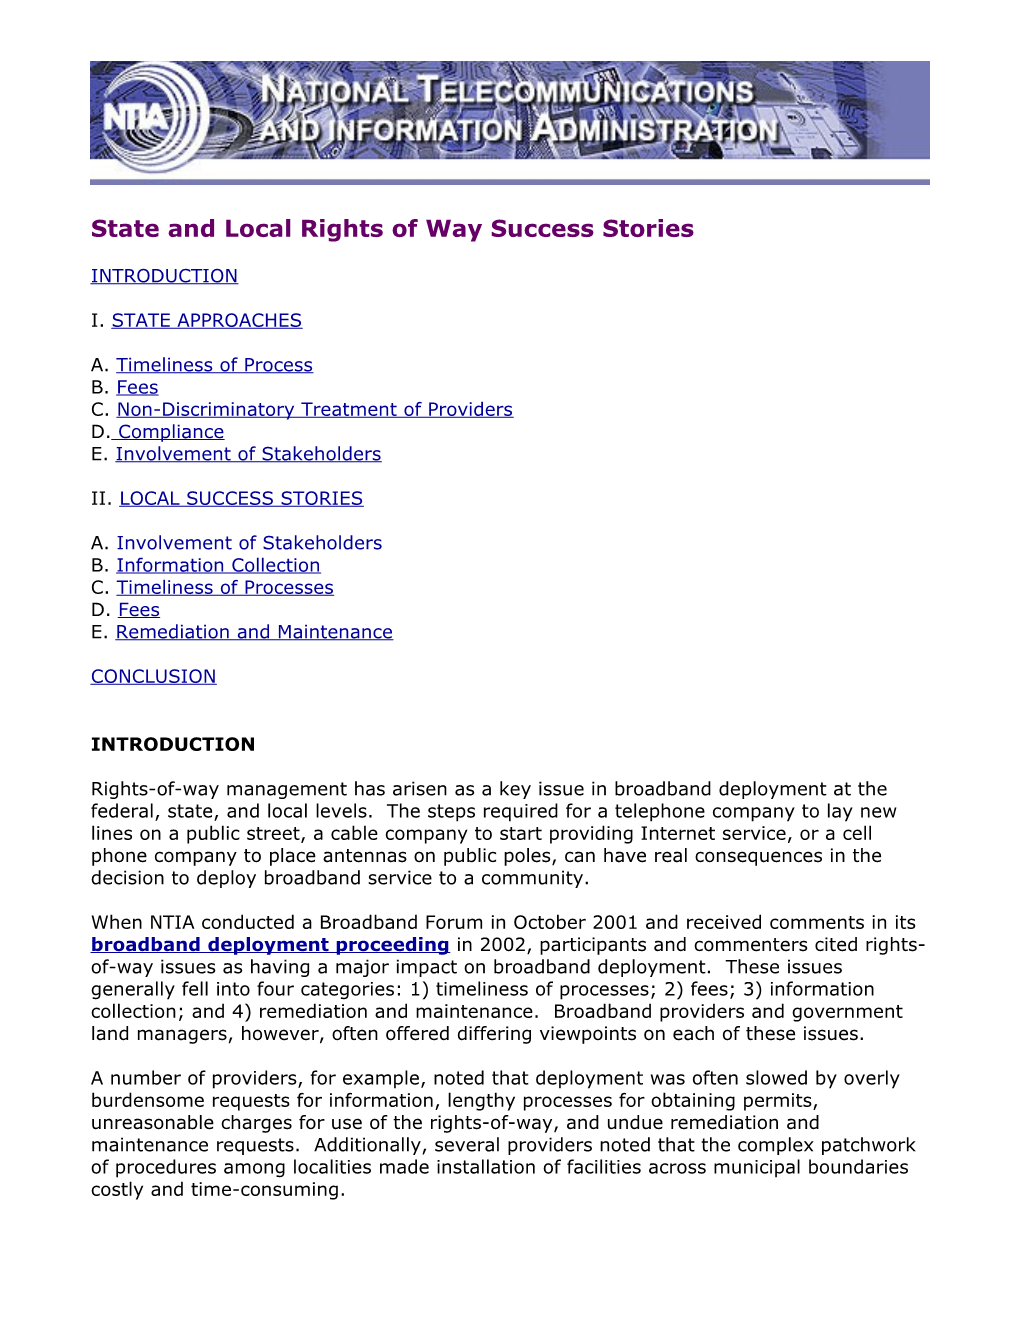 State and Local Rights of Way Success Stories INTRODUCTION I. STATE APPROACHES A. Timeliness